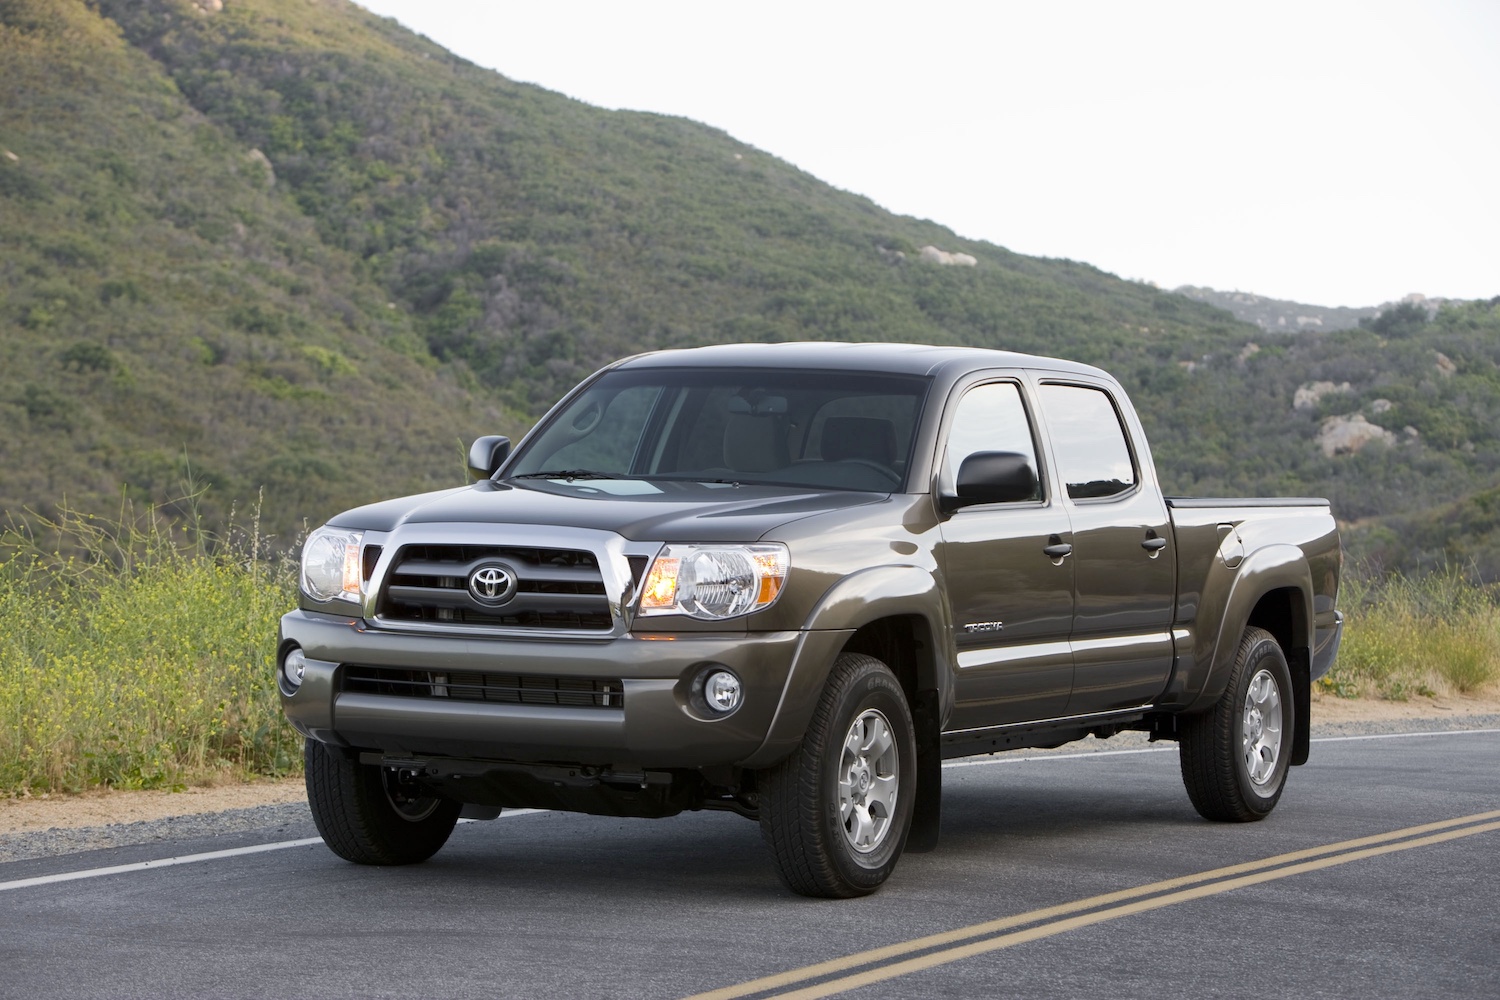 a 2009 model from the second Toyota Tacoma generation driving on a mountain road. 